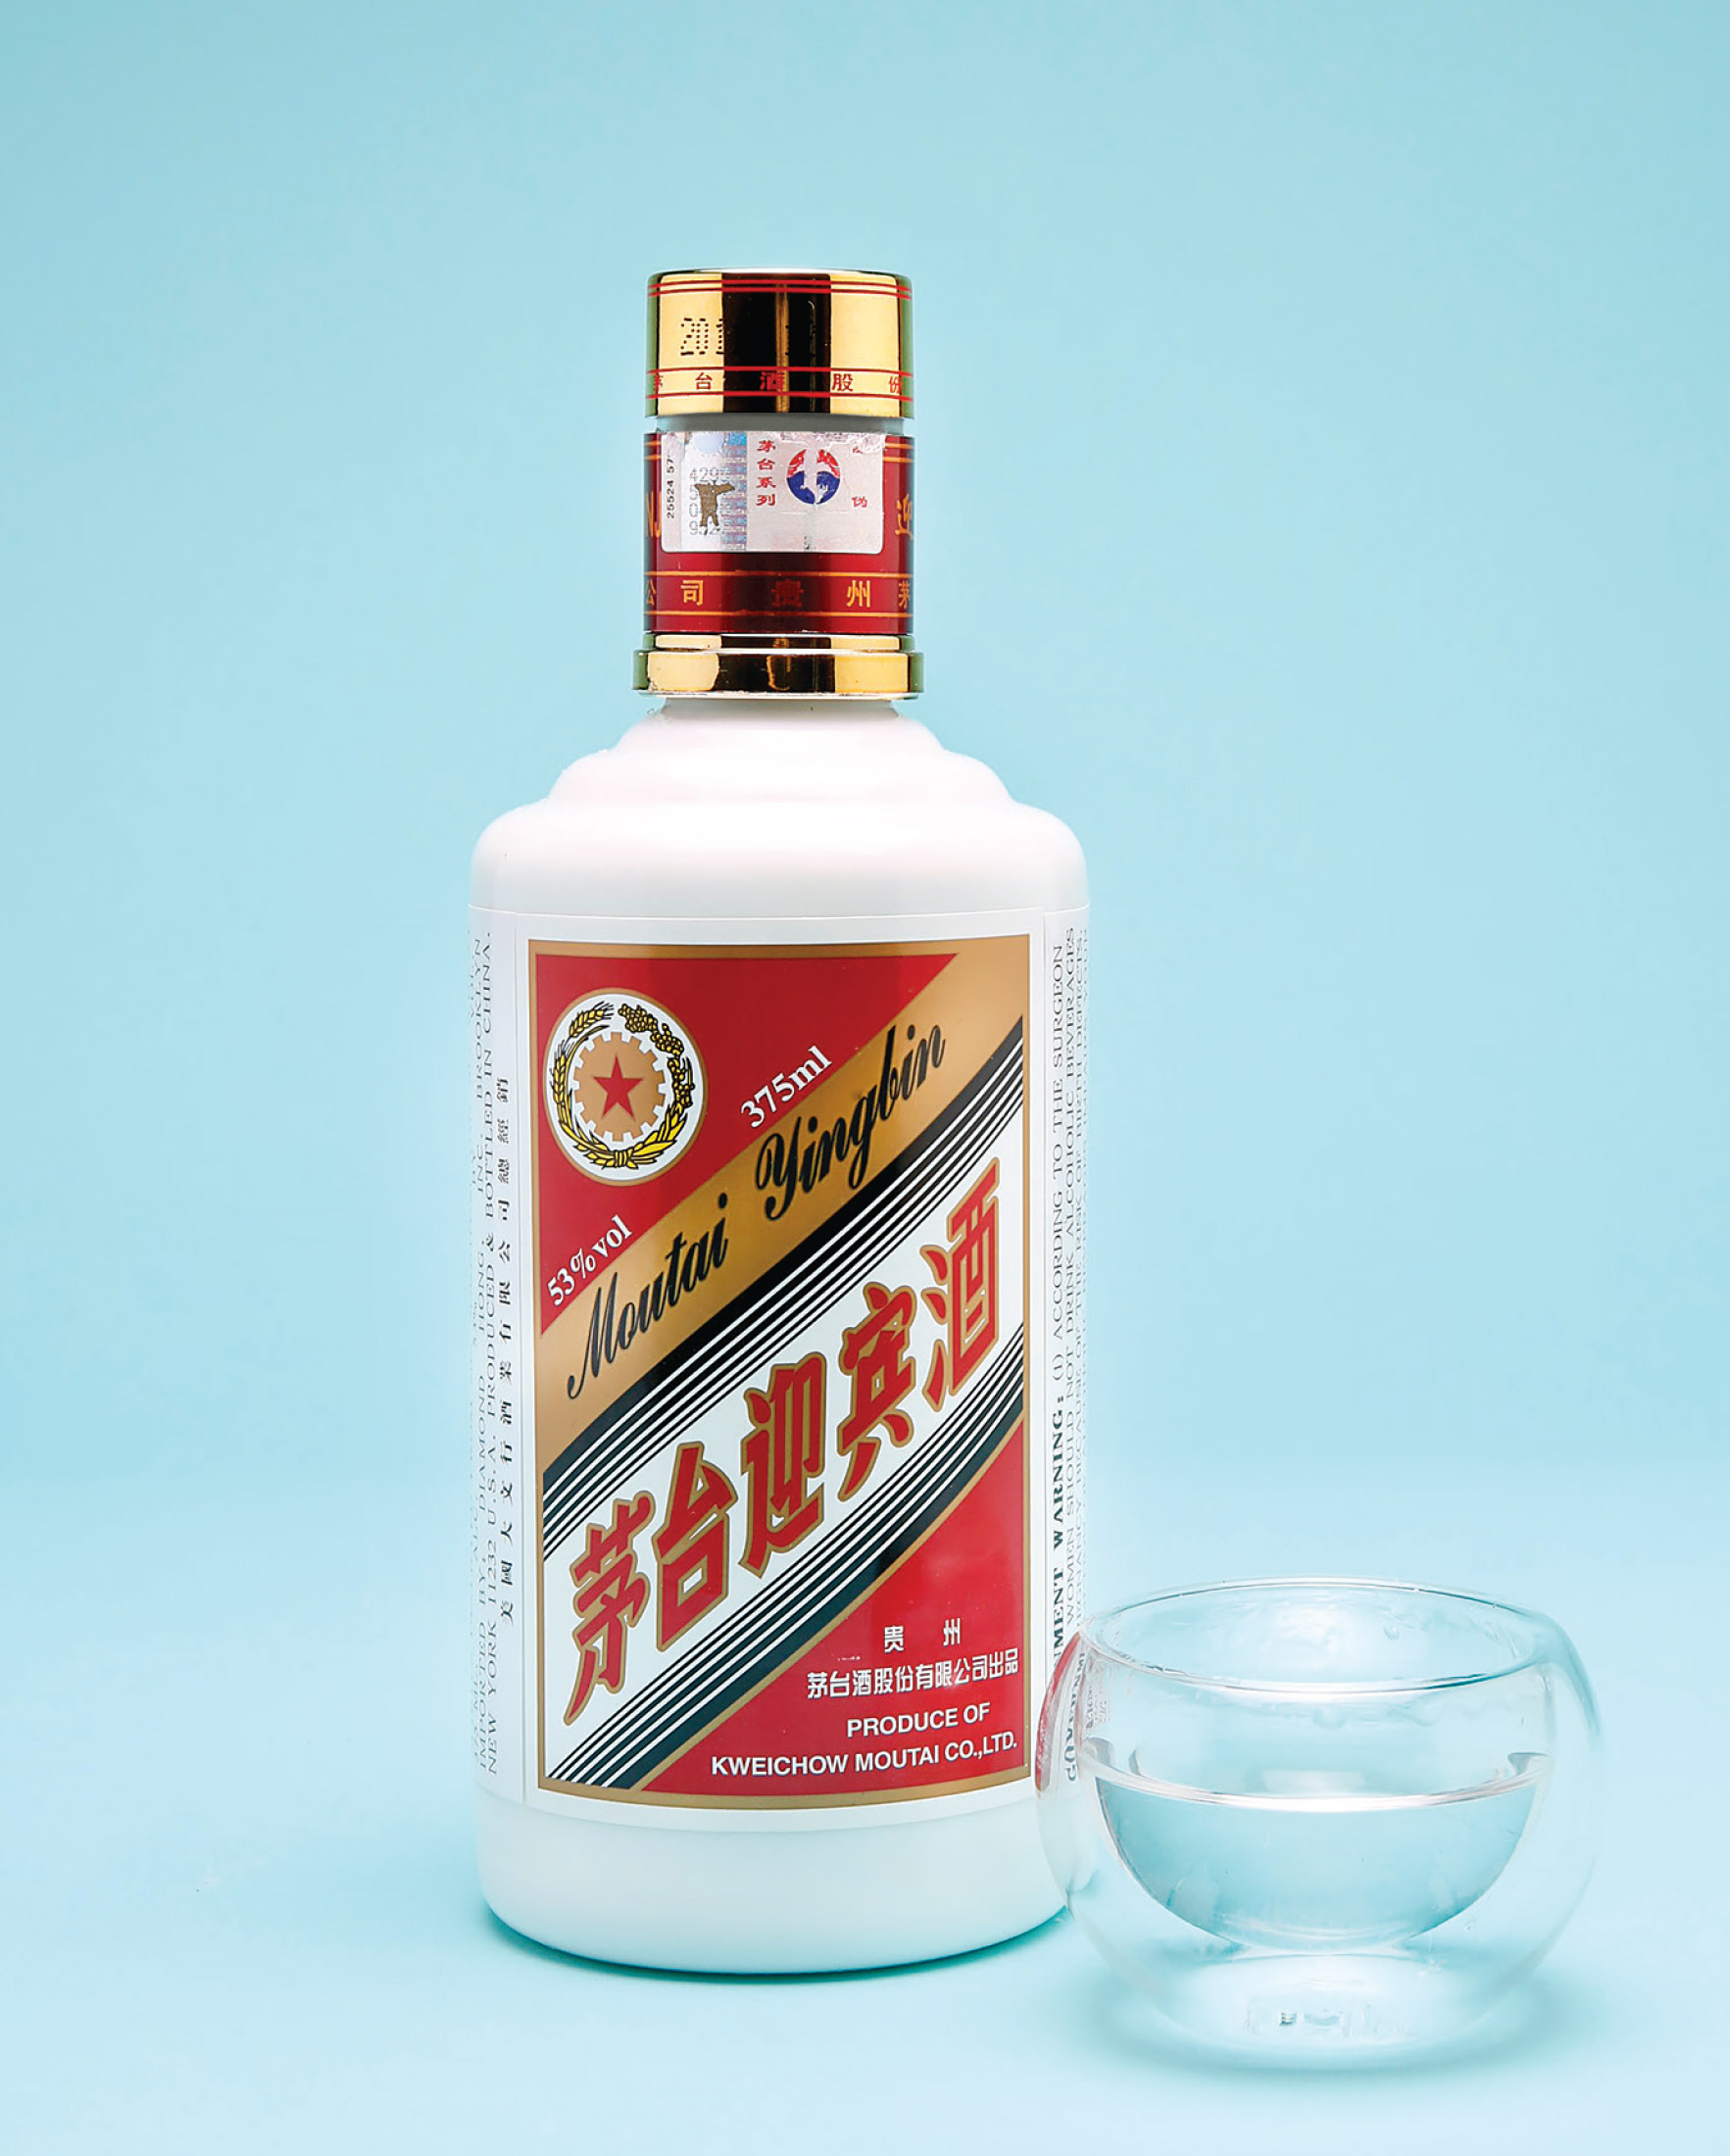 The proof level of Moutai brand’s baijiu is 106. That’s more than 50 percent alcohol.
